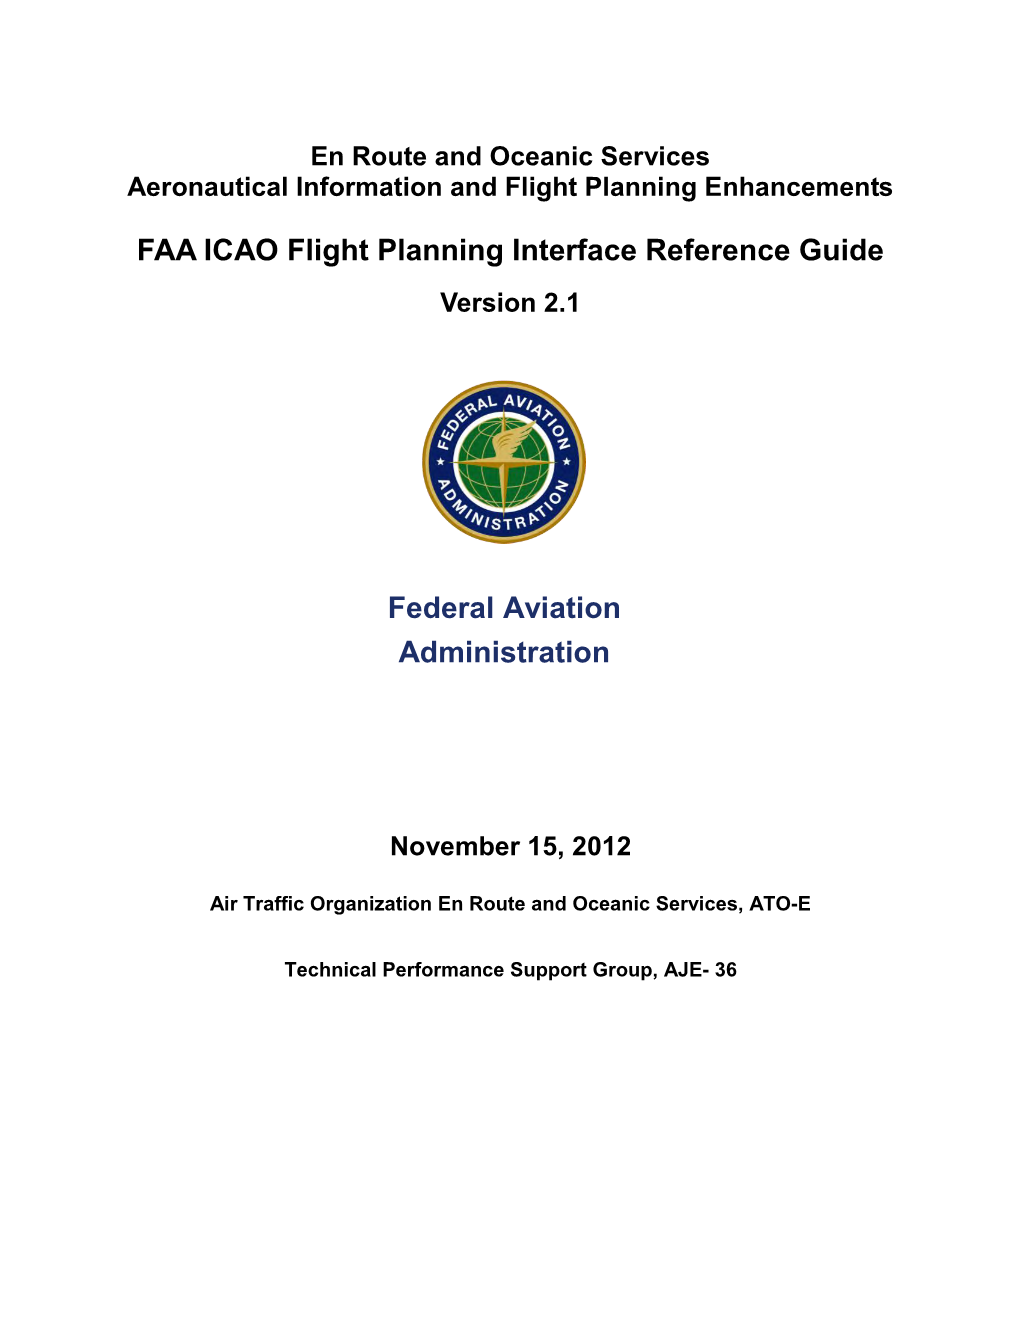 FAA ICAO Flight Planning Interface Reference Guide Version 2.1